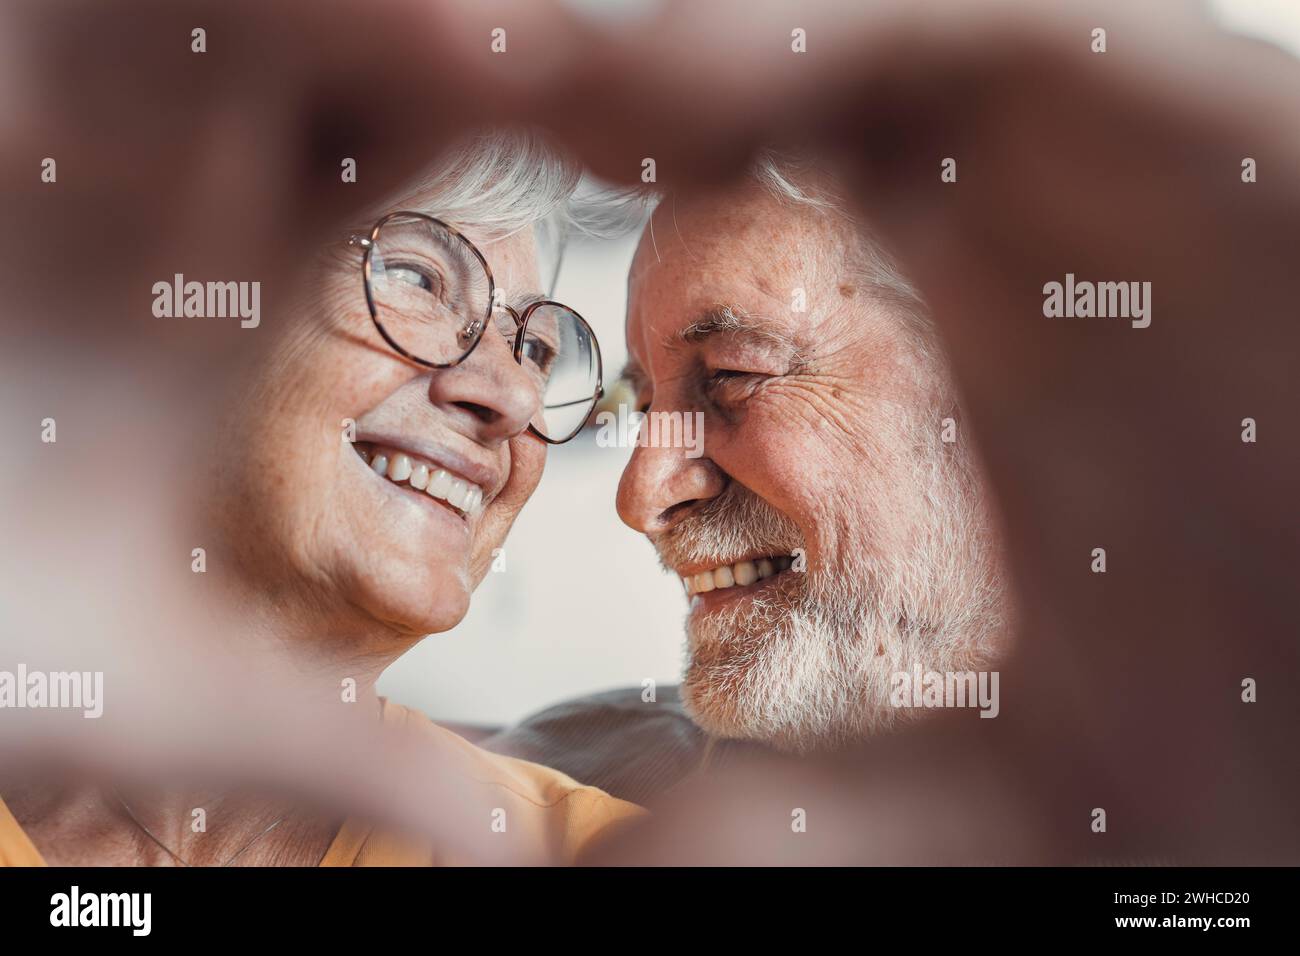 Close up portrait happy sincere middle aged elderly retired family couple making heart gesture with fingers, showing love or demonstrating sincere feelings together indoors, looking at camera. Stock Photo